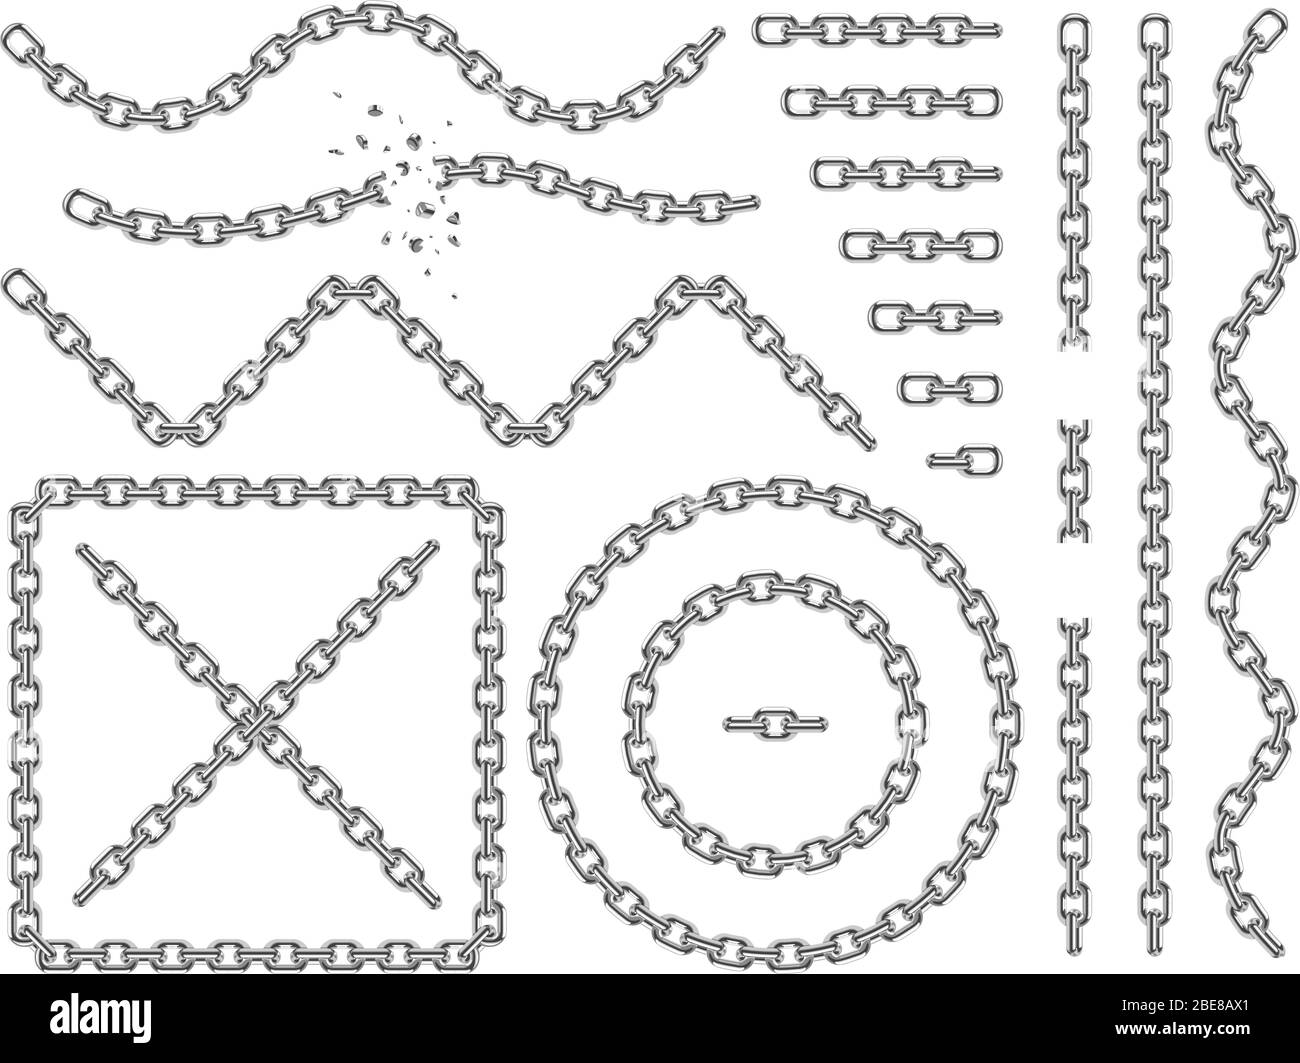 Chain link circle Black and White Stock Photos & Images - Alamy